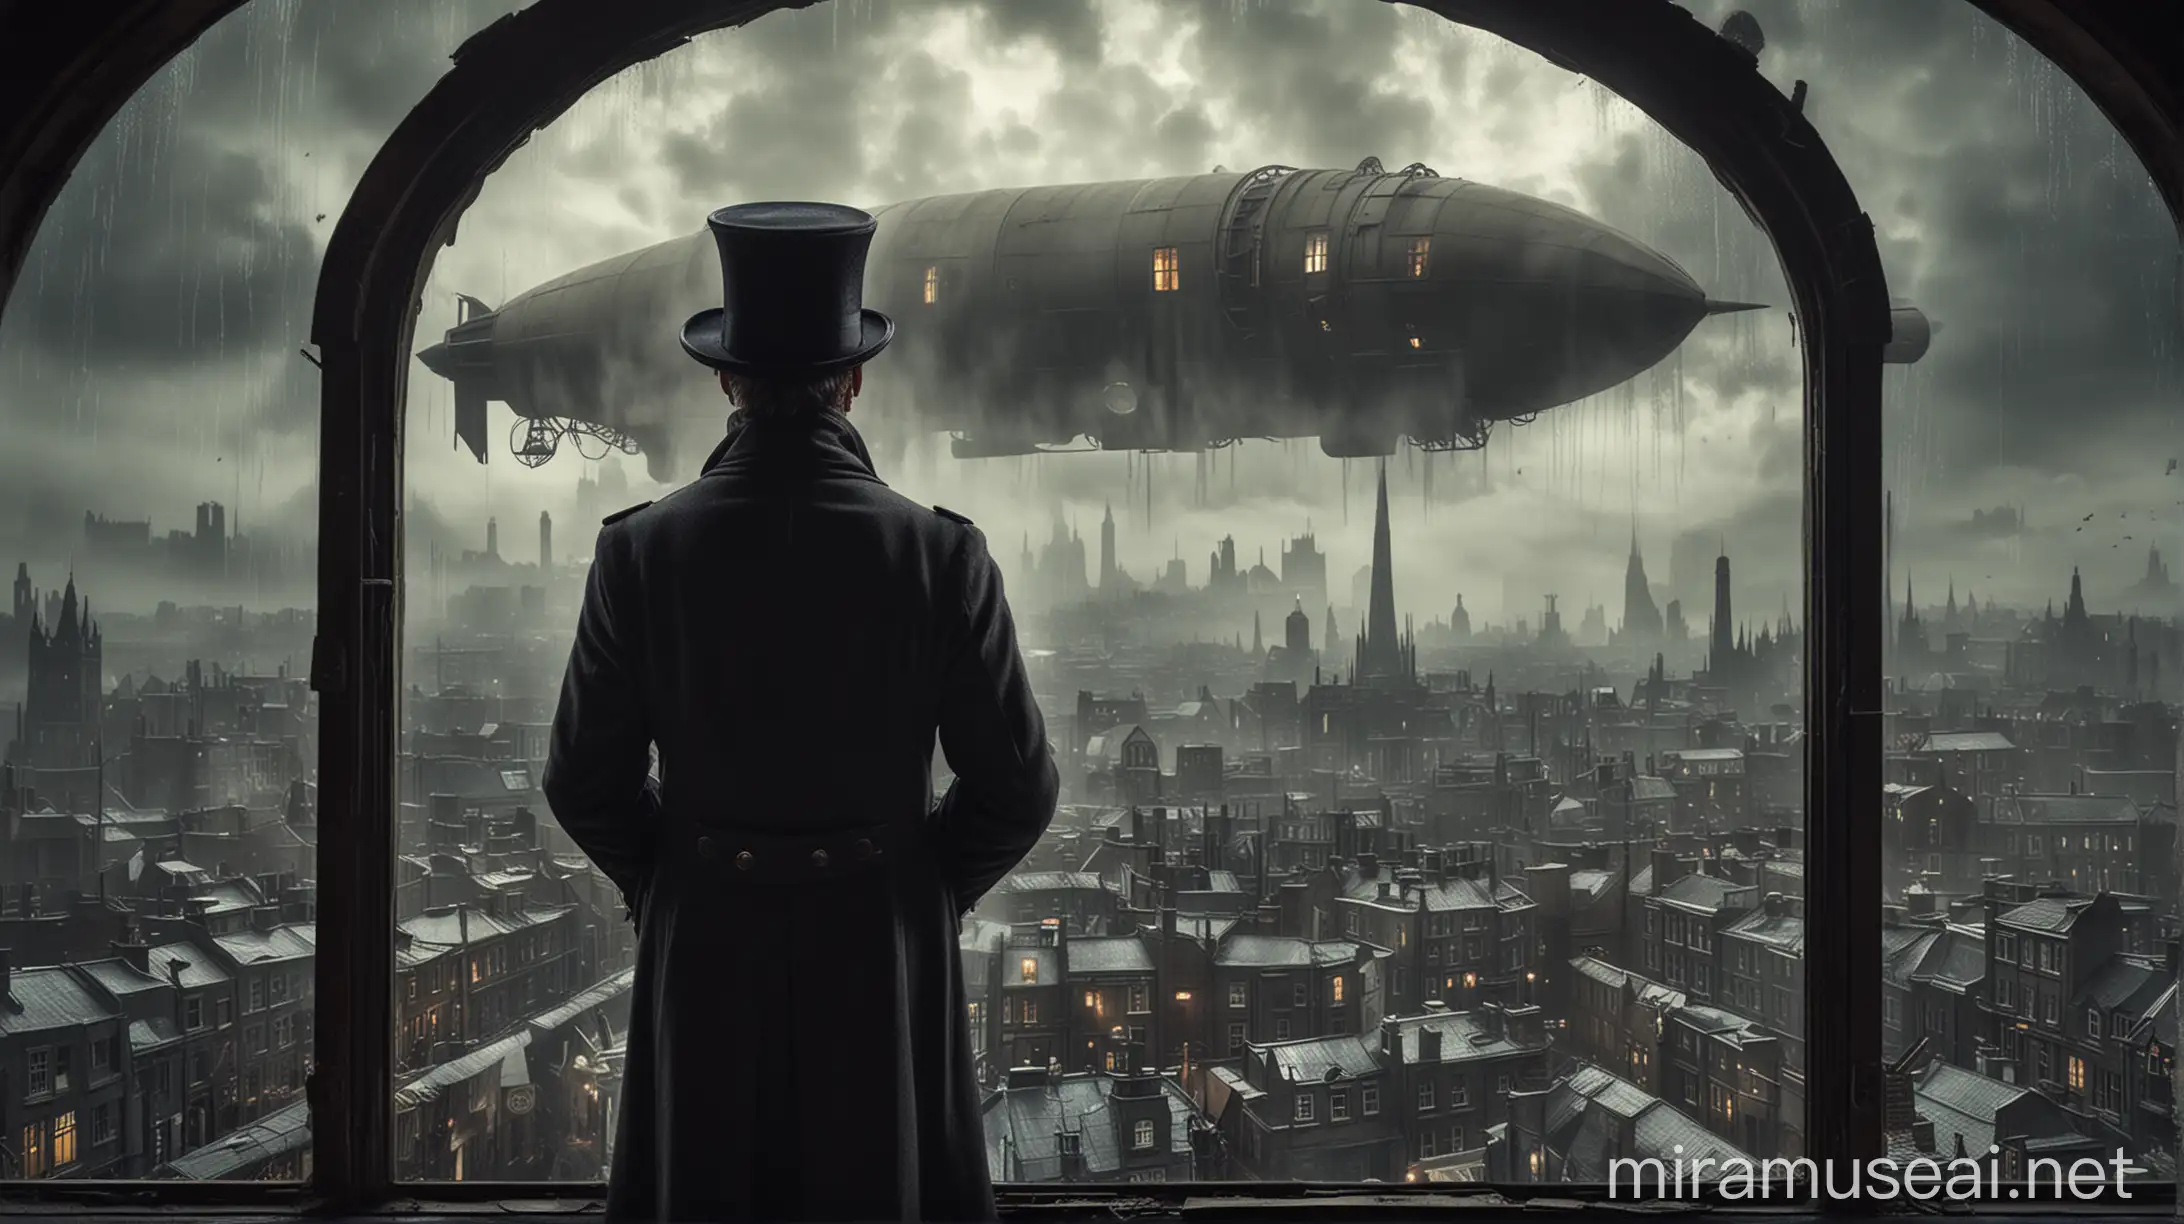 Victorian Man in Overcoat and Top Hat Gazing at Steampunk City Through Giant Window on Rainy Night